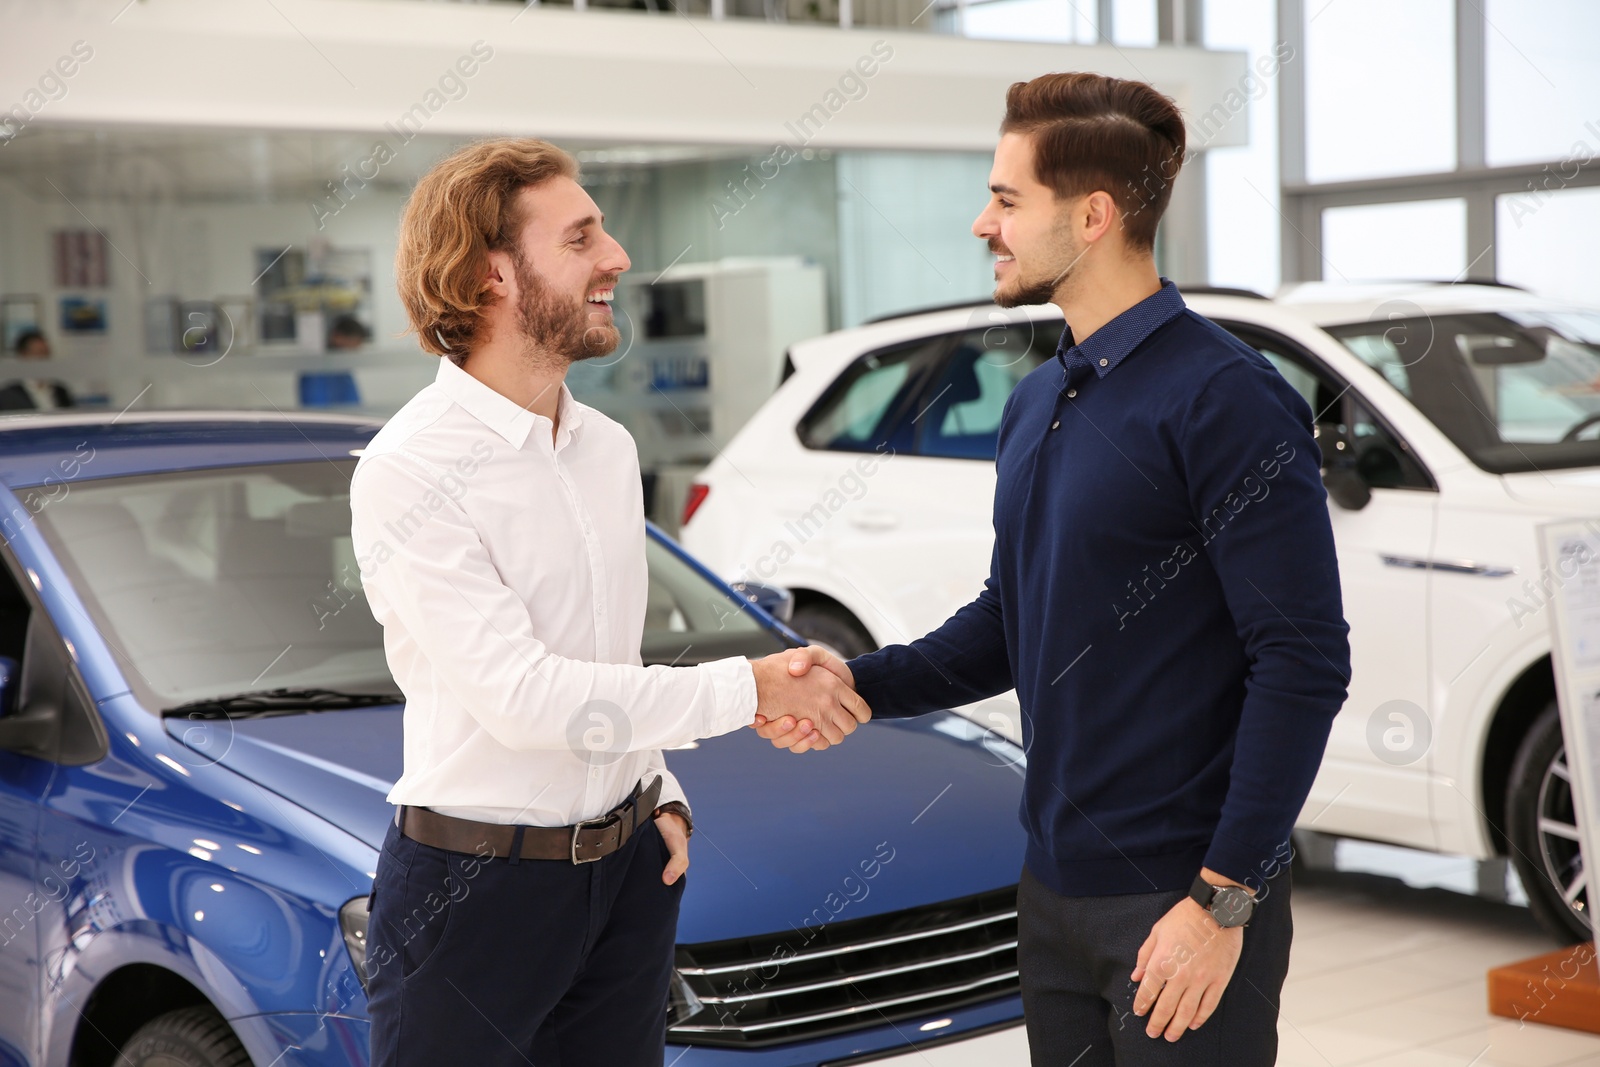 Photo of Salesman shaking hands with client in car dealership